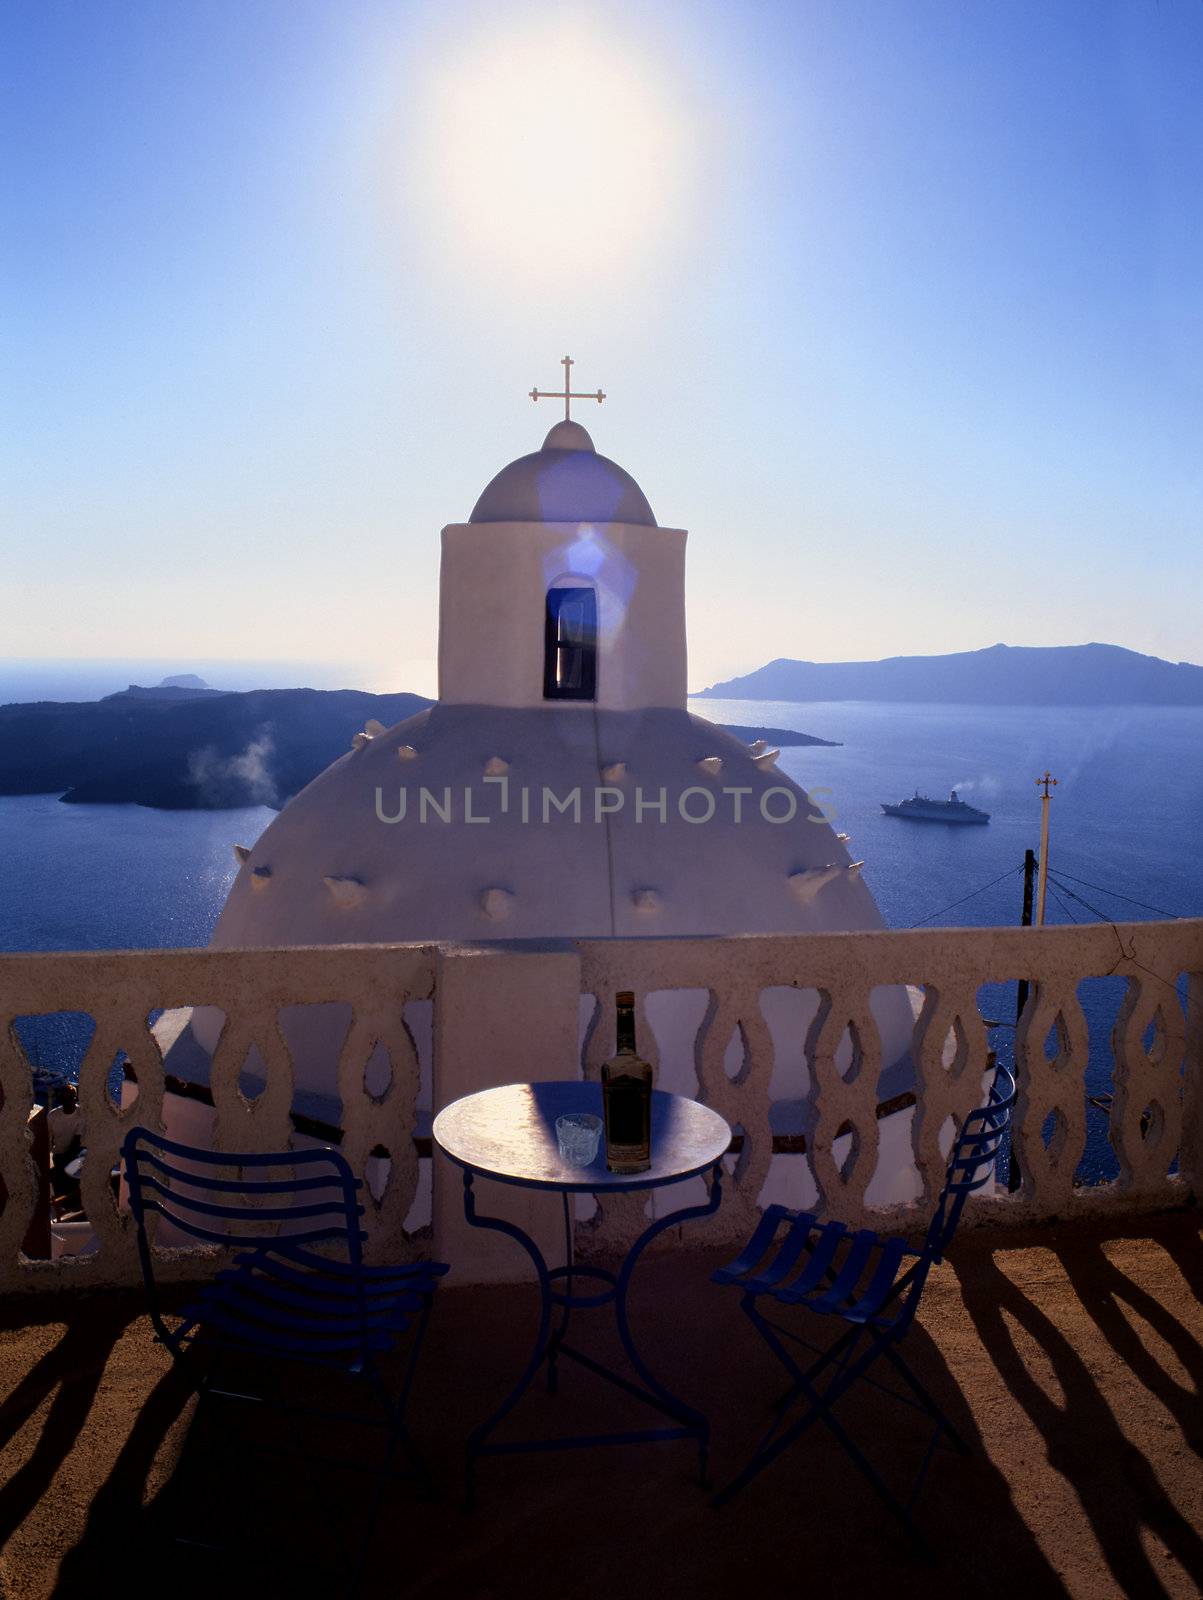 A balcony overlooking a small church on the Greek island of Santorini,  with the sun setting directly in front blue sky and mountains in the background.